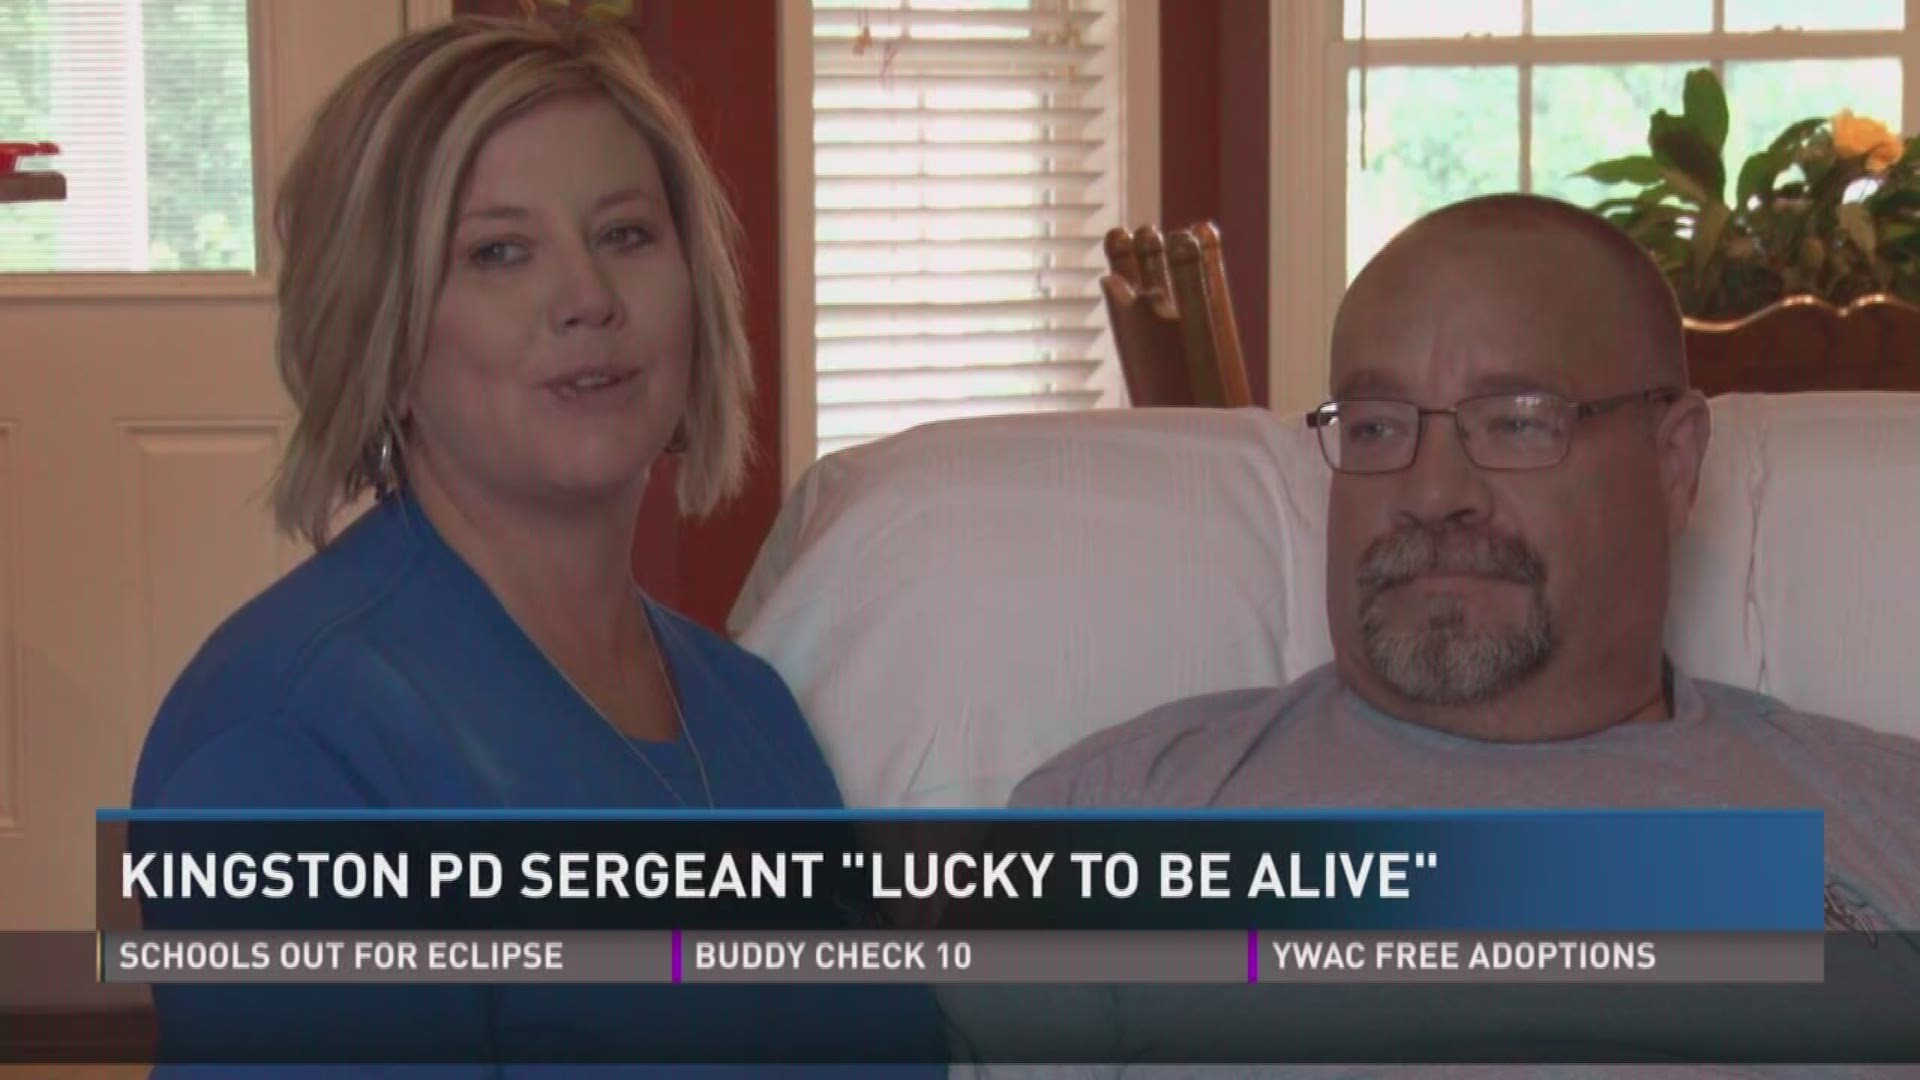 Aug. 10, 2017: Kingston Police Sgt. Jerry Singleton feels lucky to be alive after officers say a suspect ran over him. Now he's recovering at home with a broken leg.